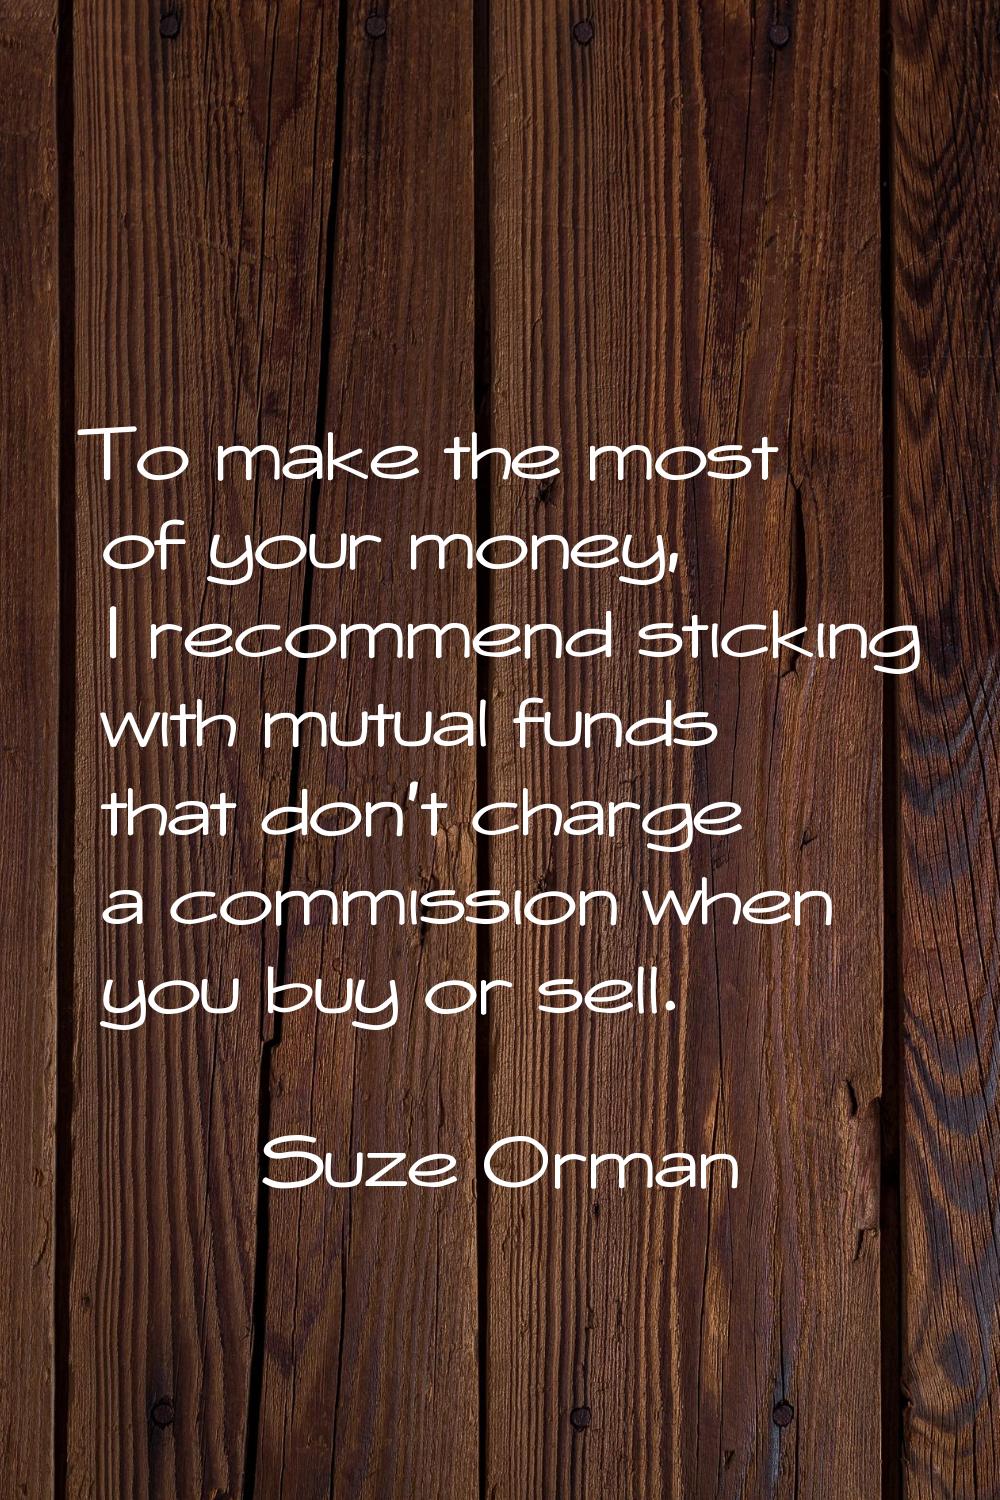 To make the most of your money, I recommend sticking with mutual funds that don't charge a commissi